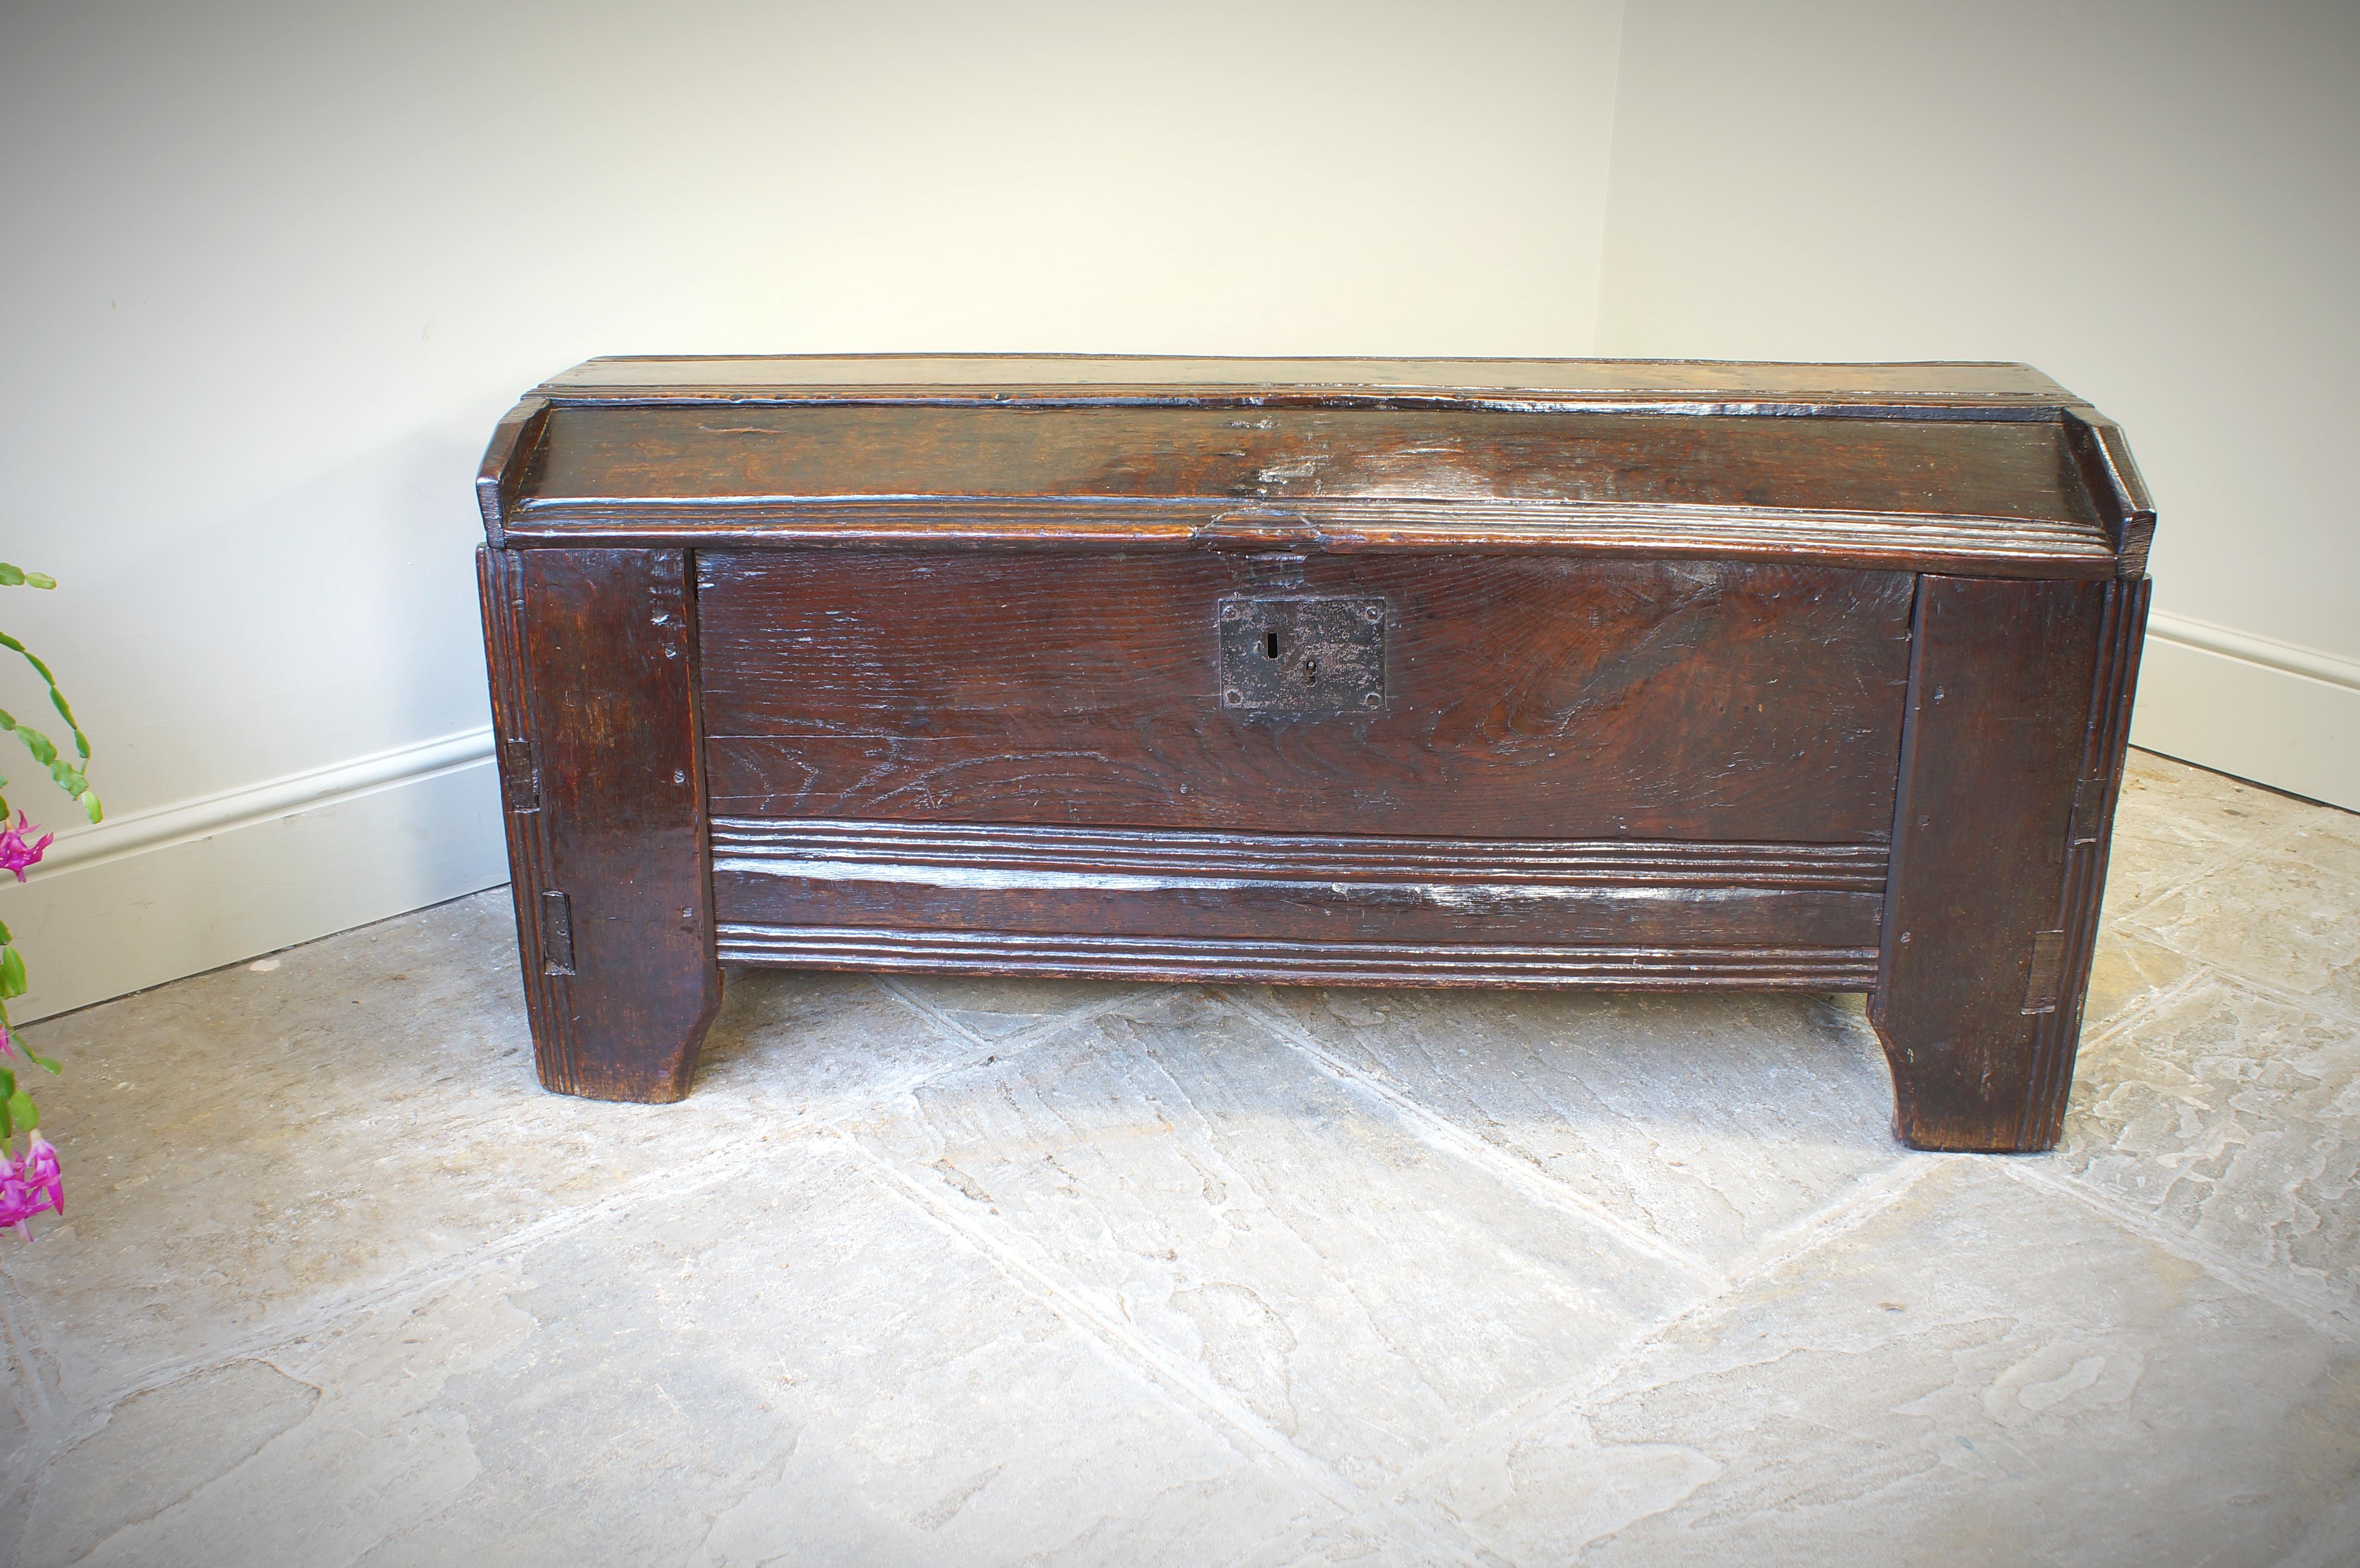 English A 16th Century Boarded Oak Clamp-front Chest Or Ark, Welsh Borders, Circa 1550 For Sale